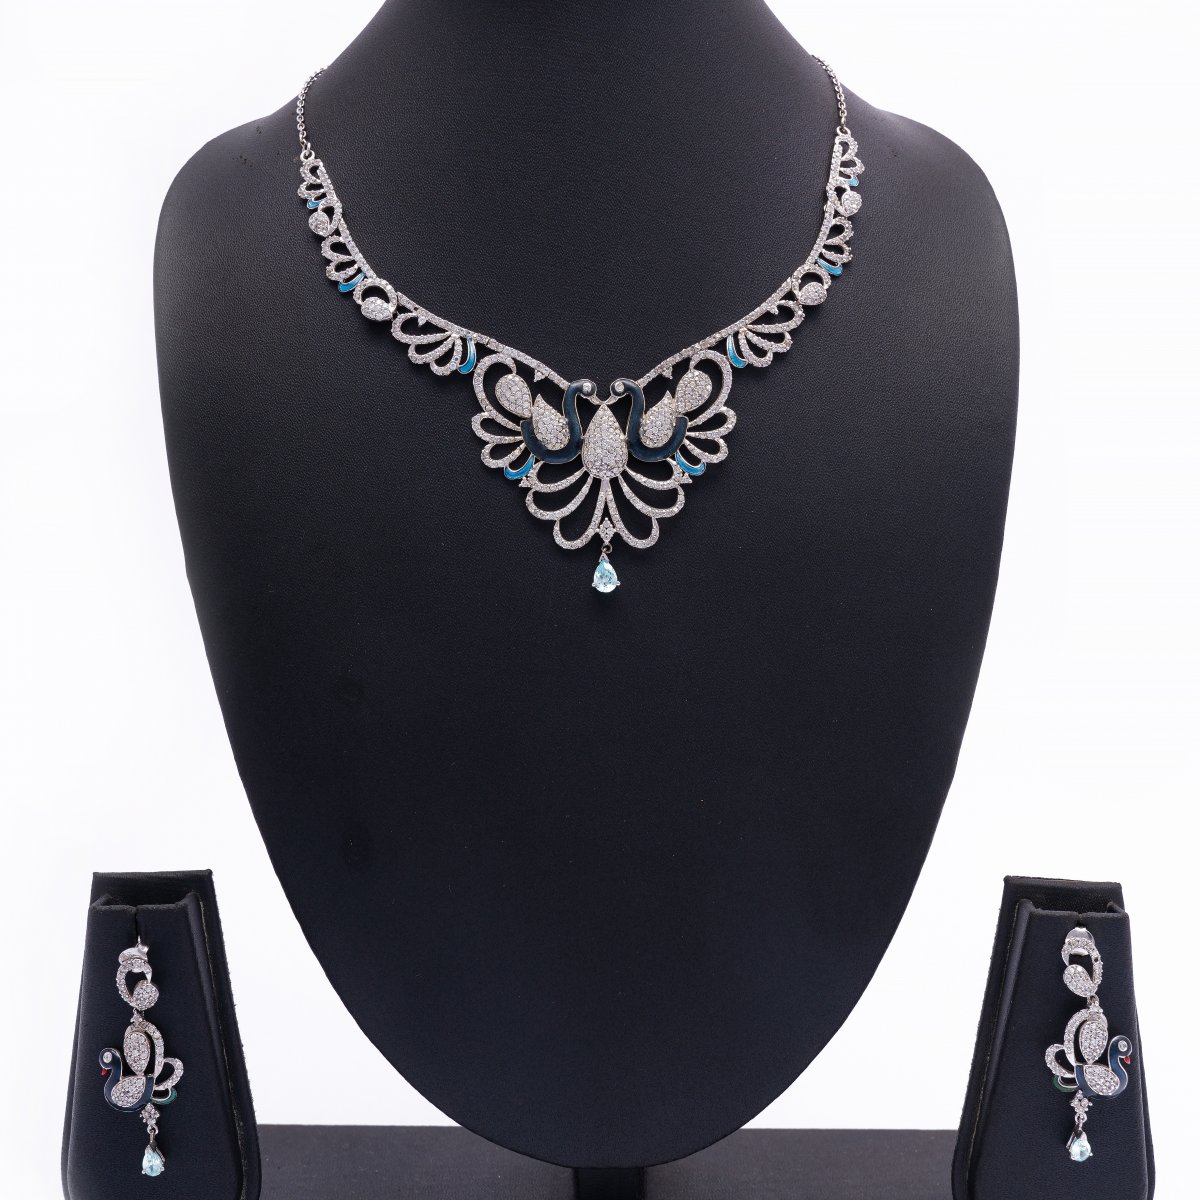 92.5 SILVER ENAMELLED DOUBLE PEACOCK NECKLACE WITH EARRINGS 